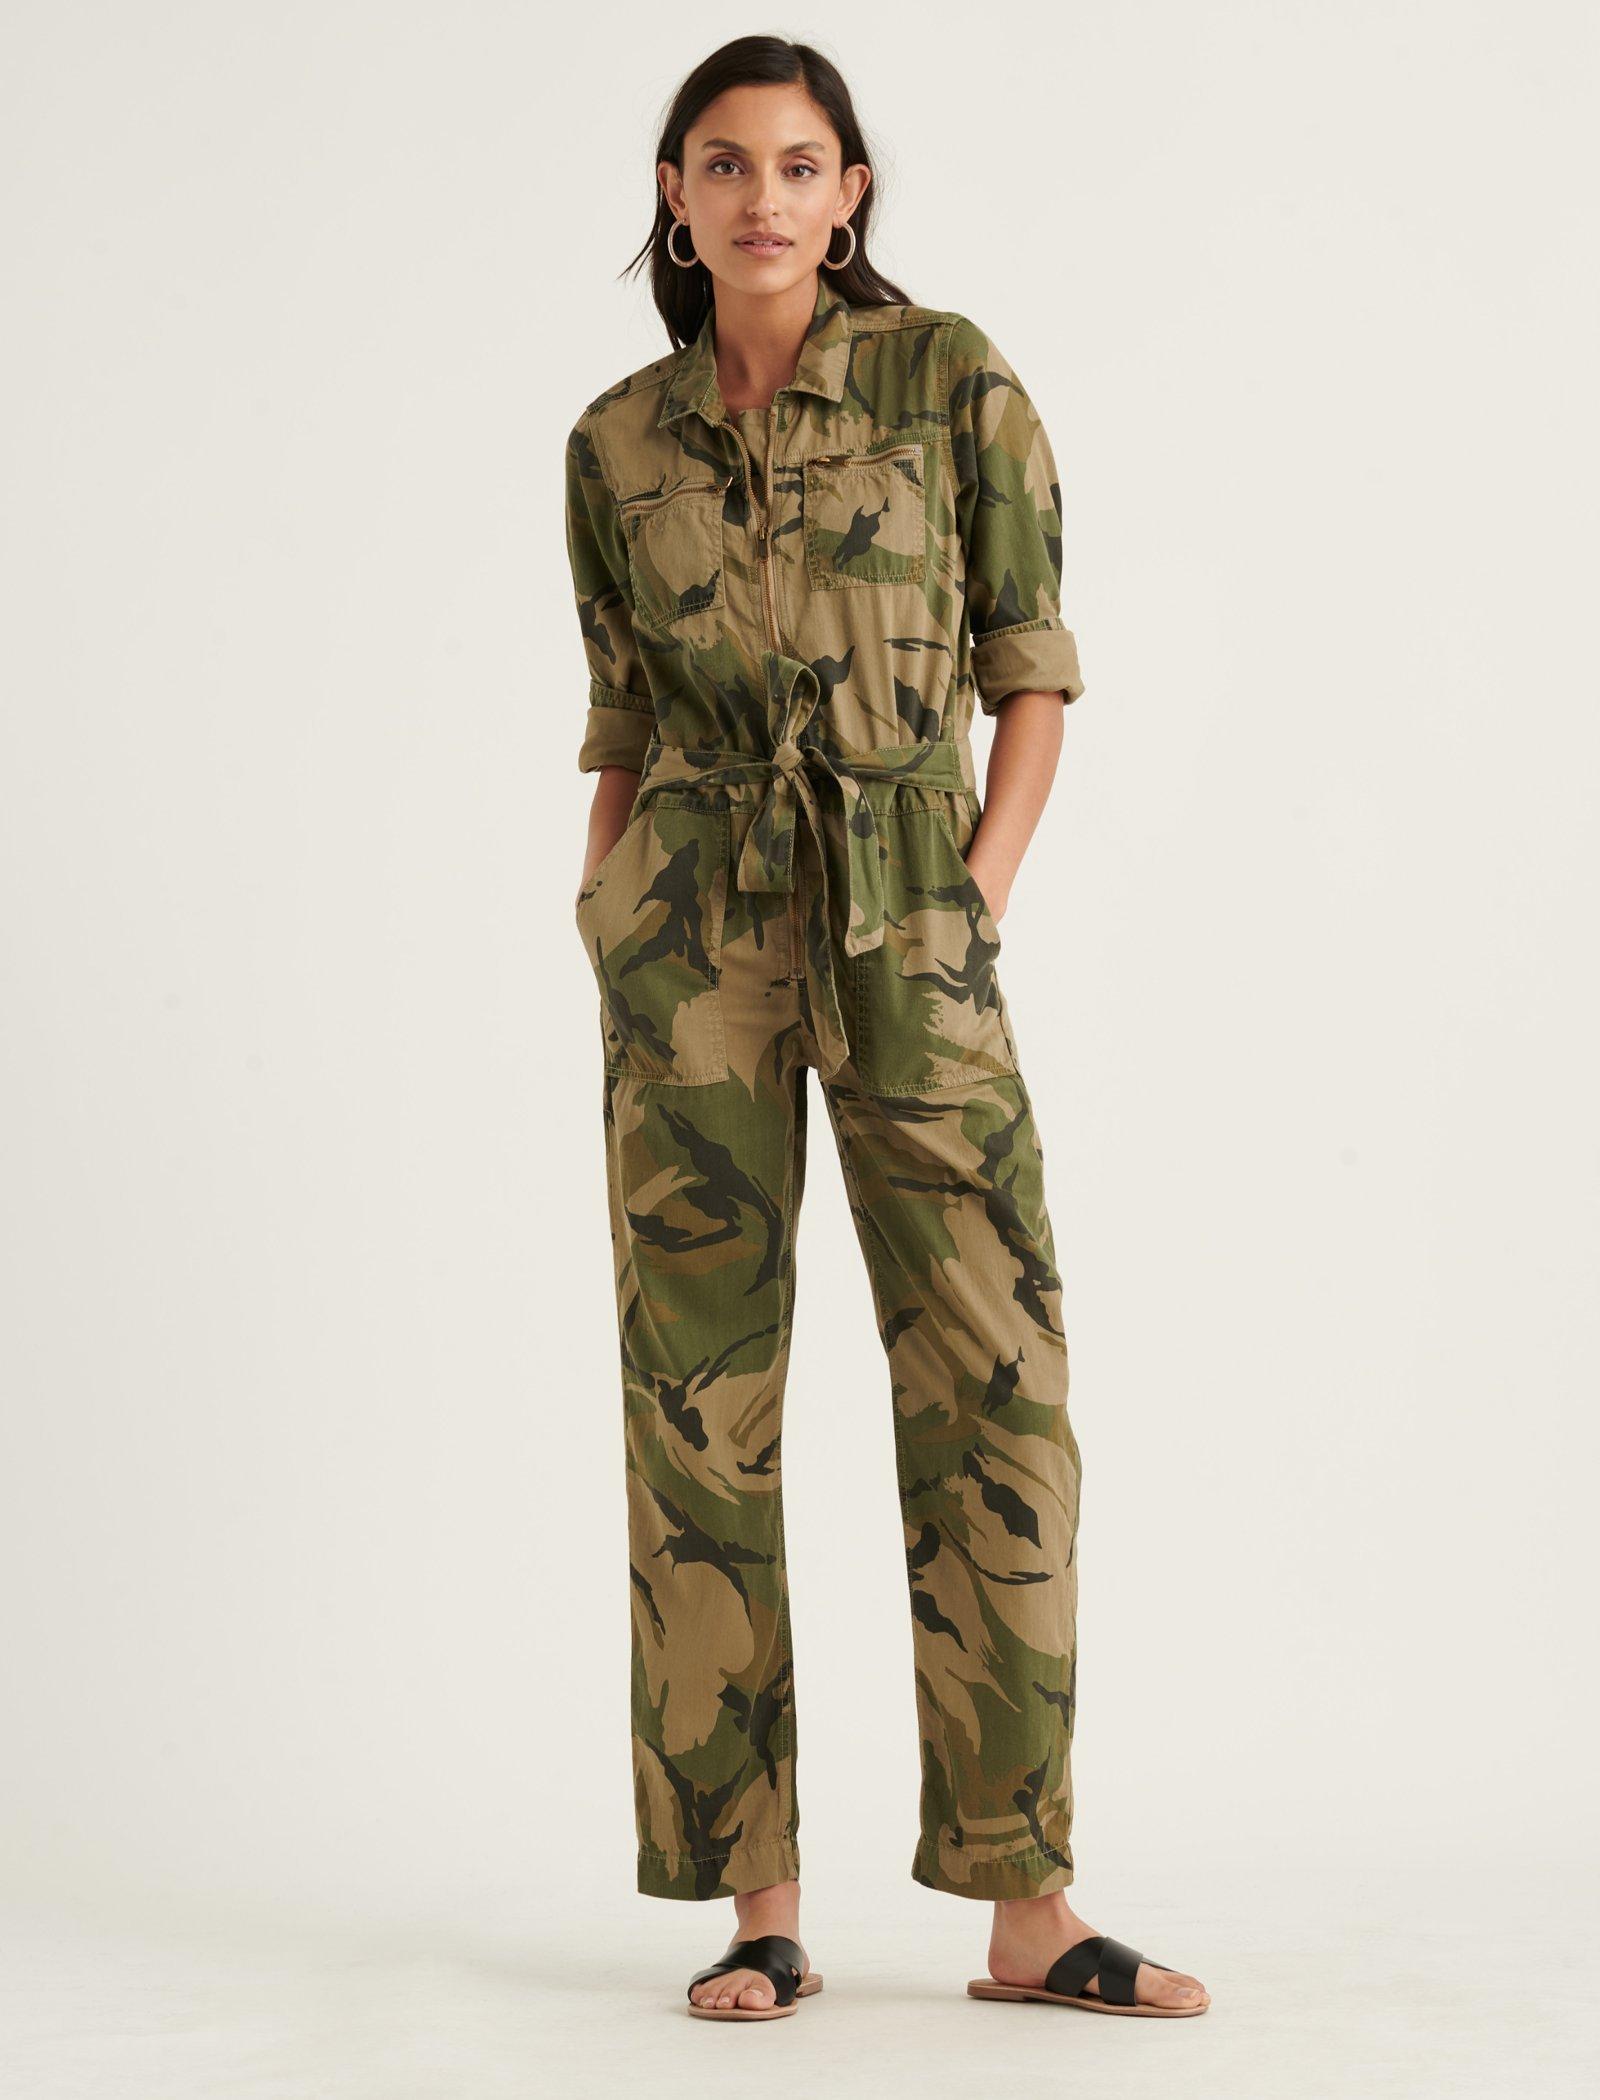 lucky brand camouflage jeans